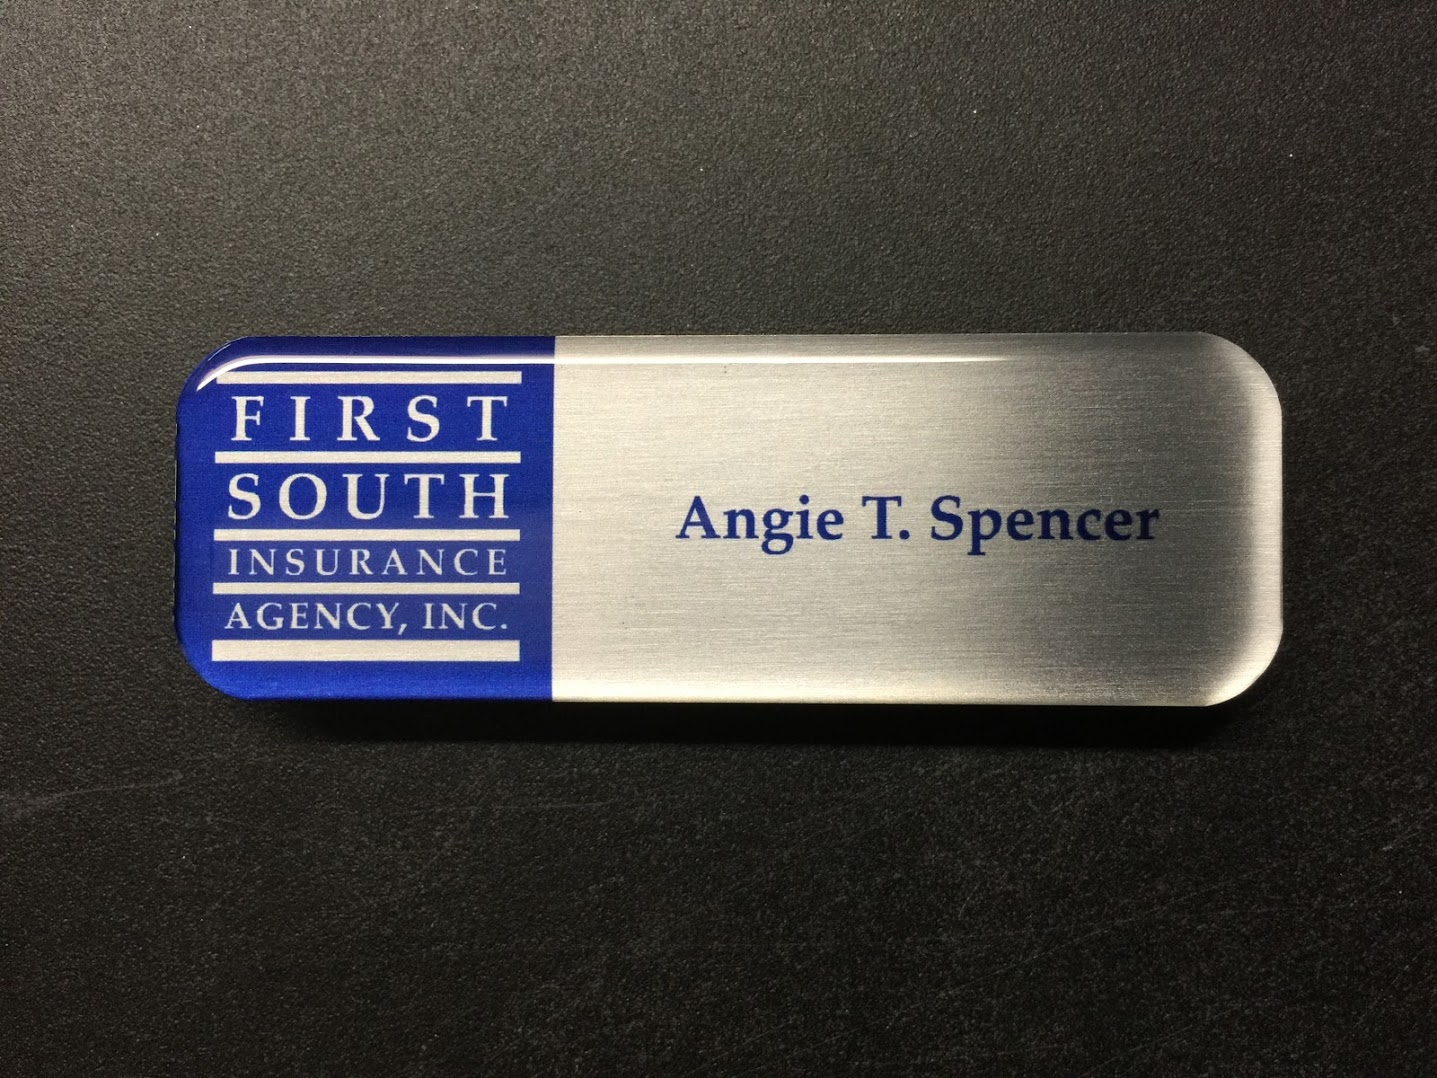 A brushed silver nametag with epoxy coating. Design is for First South Insurance Agency, Inc.